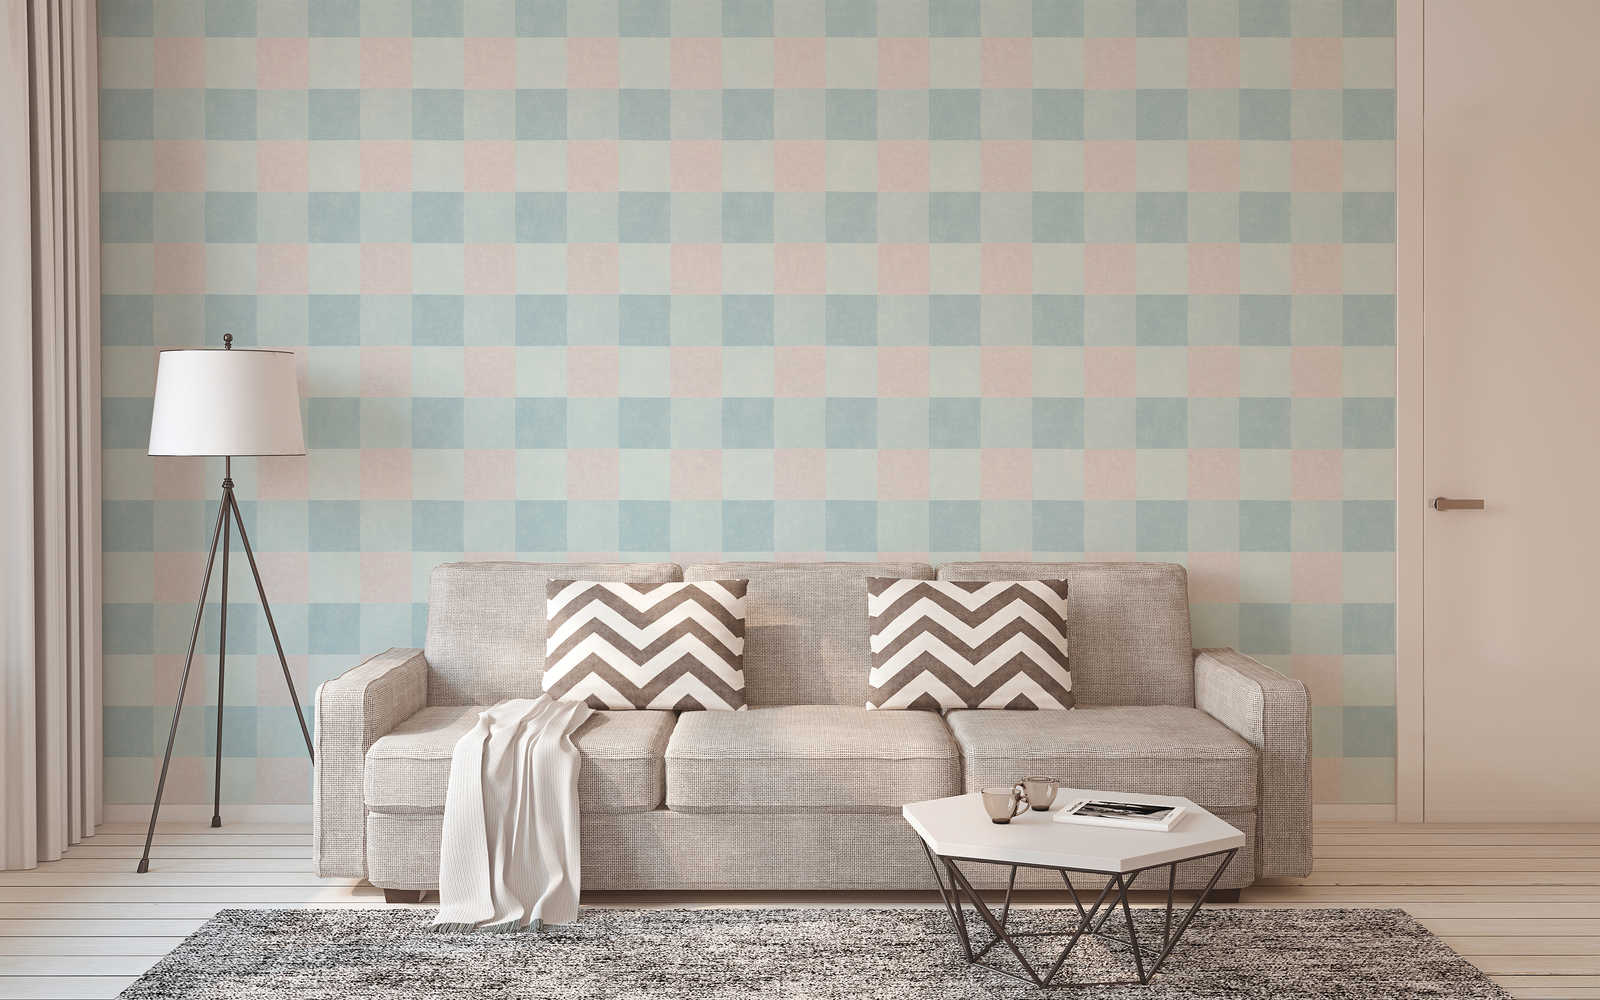             Plaid non-woven wallpaper with linen look - blue, grey
        